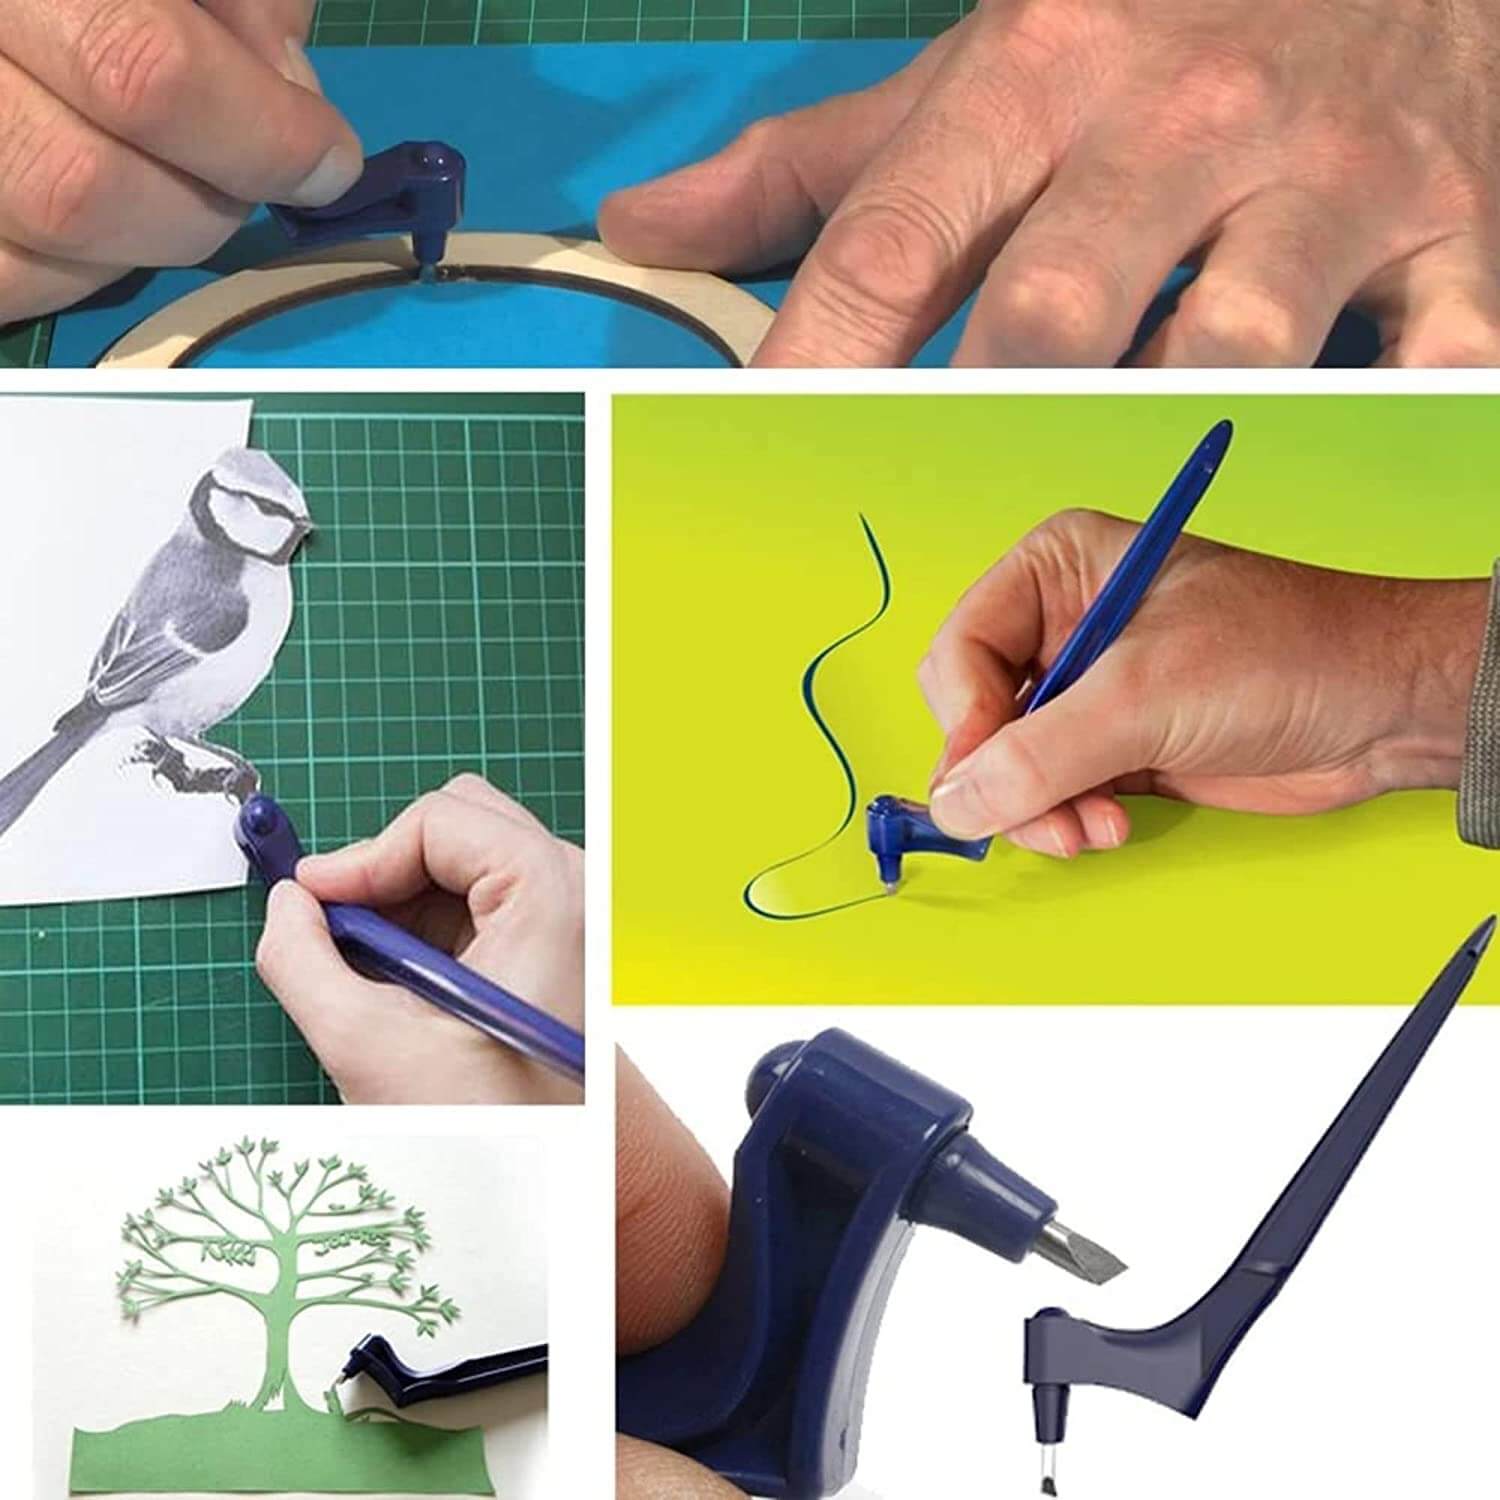 Gyro-cut PRO Starter Kit. Complete With a Gyro-cut PRO Tool, Standard Cut  Paper Blade and a 50ml Bottle of Sticky Mat Adhesive -  Israel